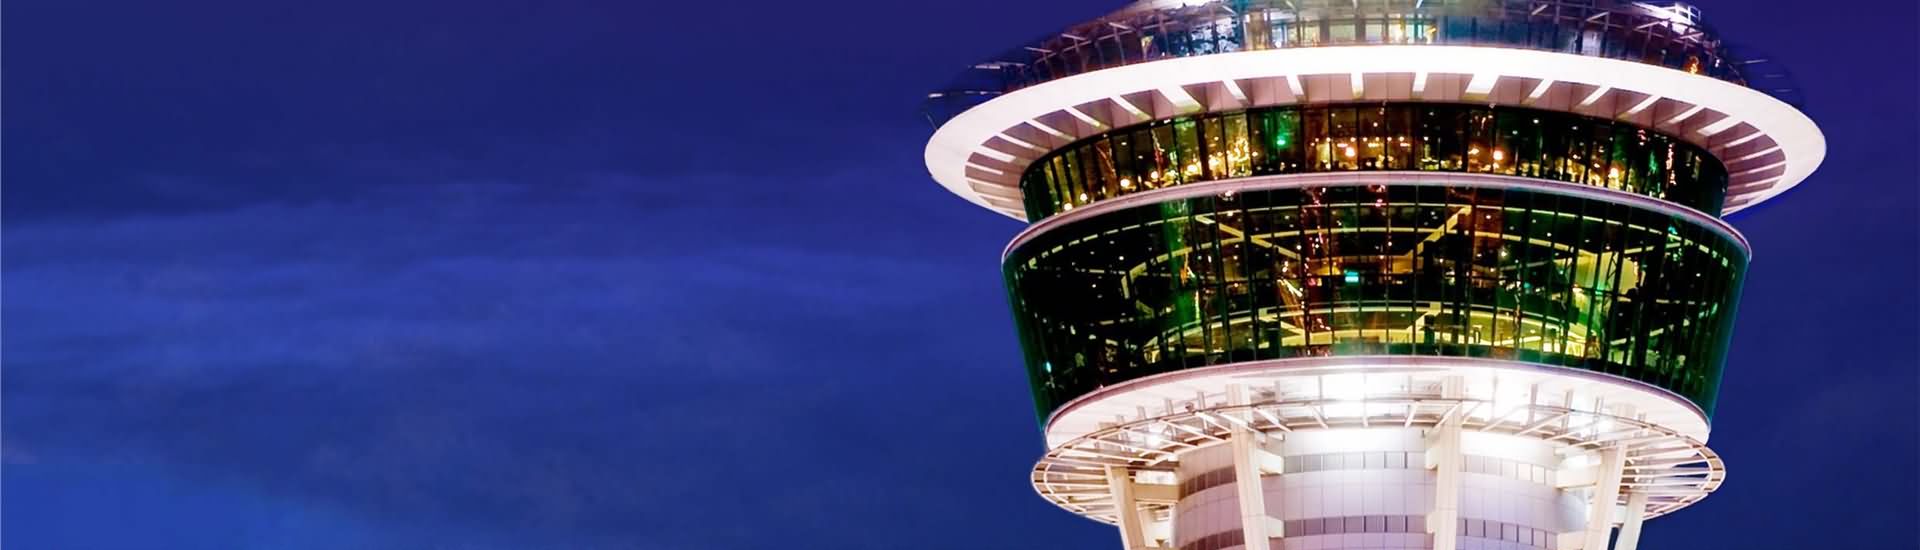 Closeup Of Observation Deck Of Macau Tower At Night